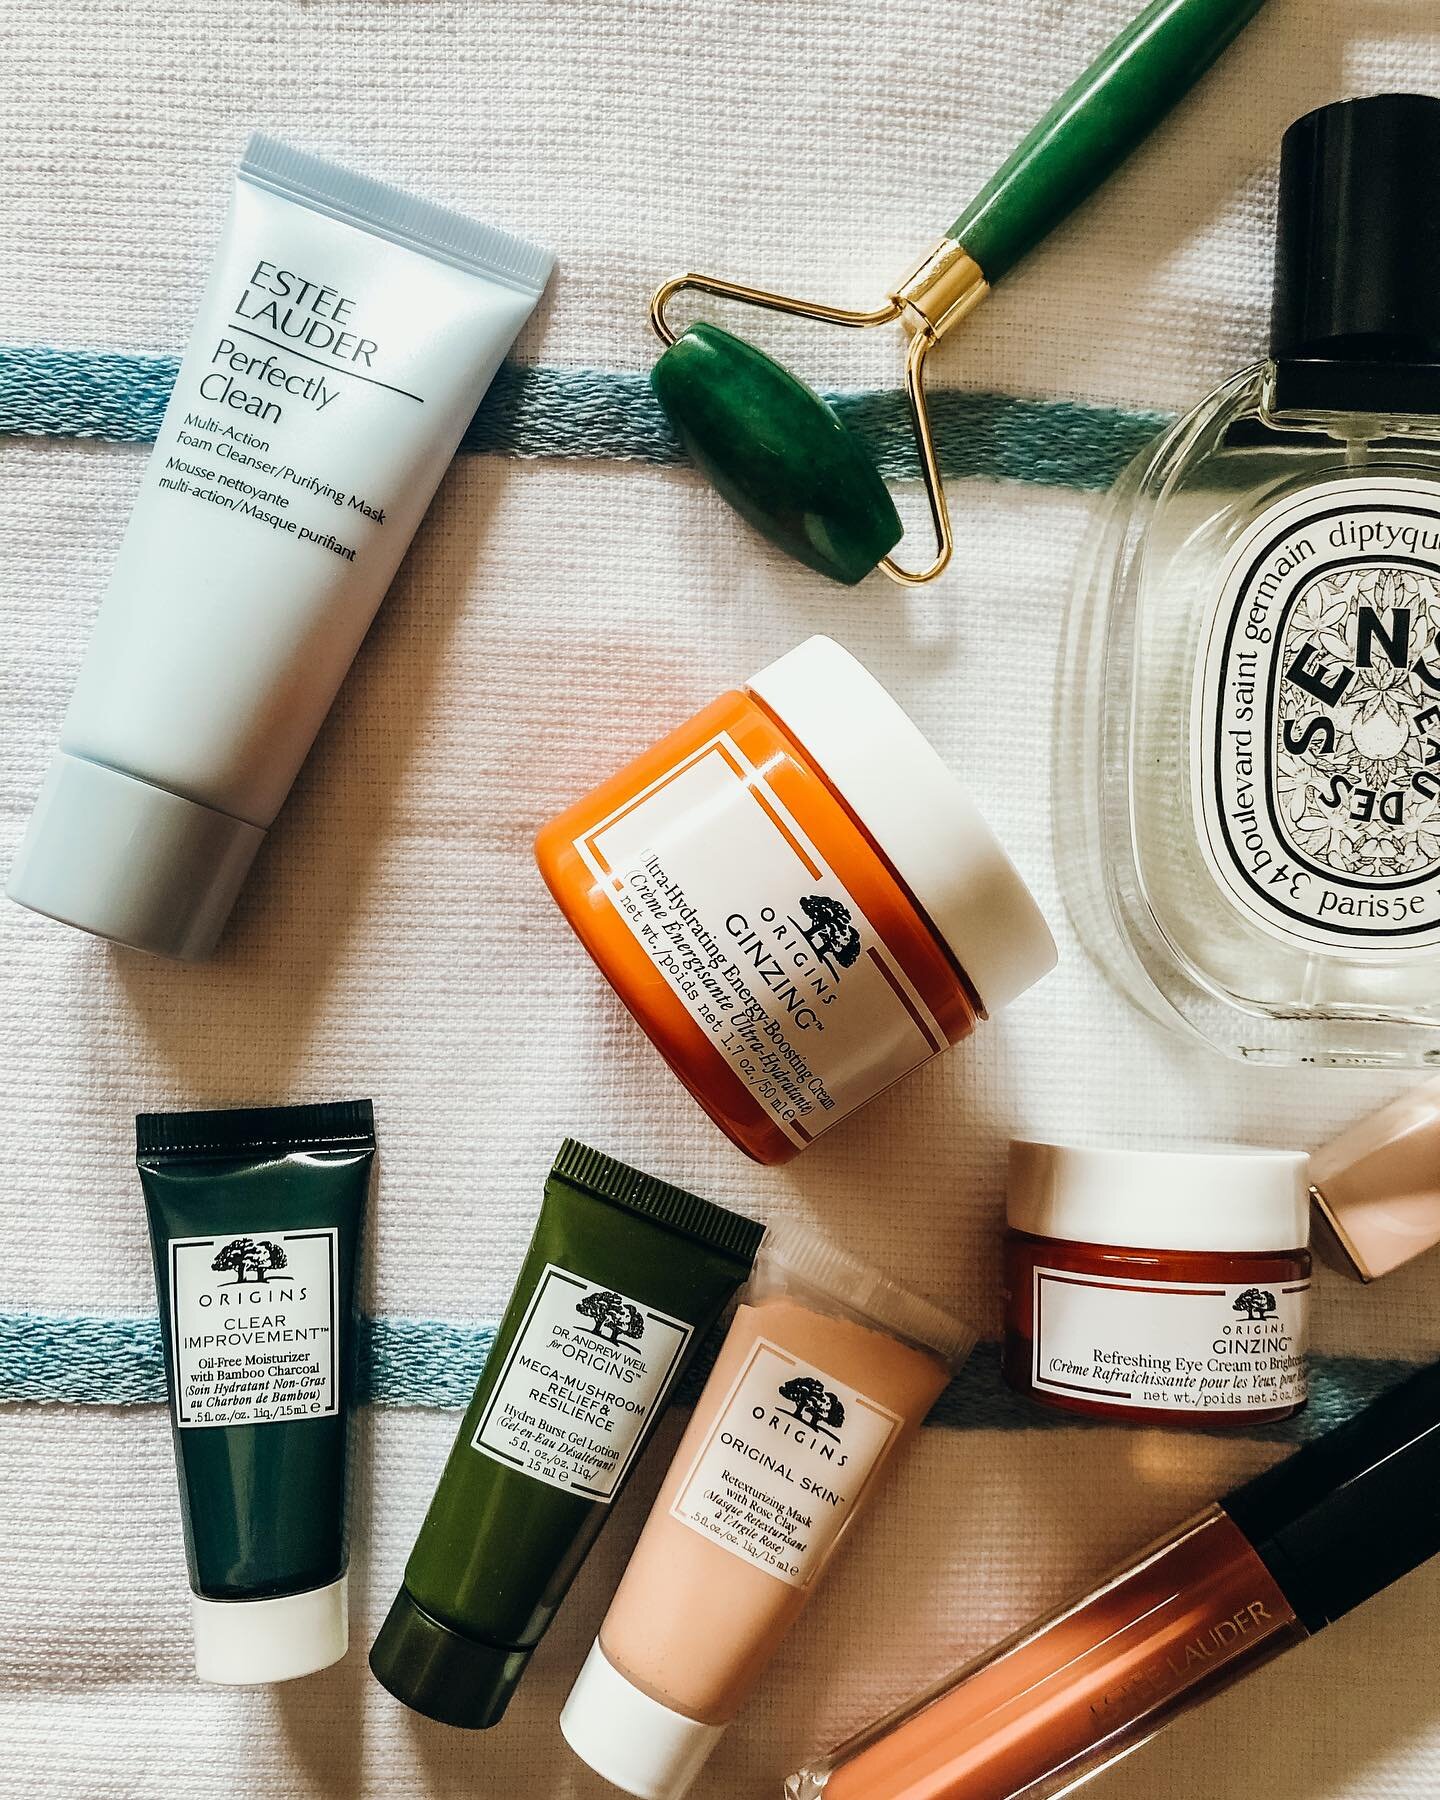 When choosing skincare products, we often look to label claims, such as &ldquo;all-natural,&rdquo; &ldquo;cruelty-free,&rdquo; and &ldquo;botanical,&rdquo; to help us determine if a product is safe and responsibly made. Unfortunately, behind these bu